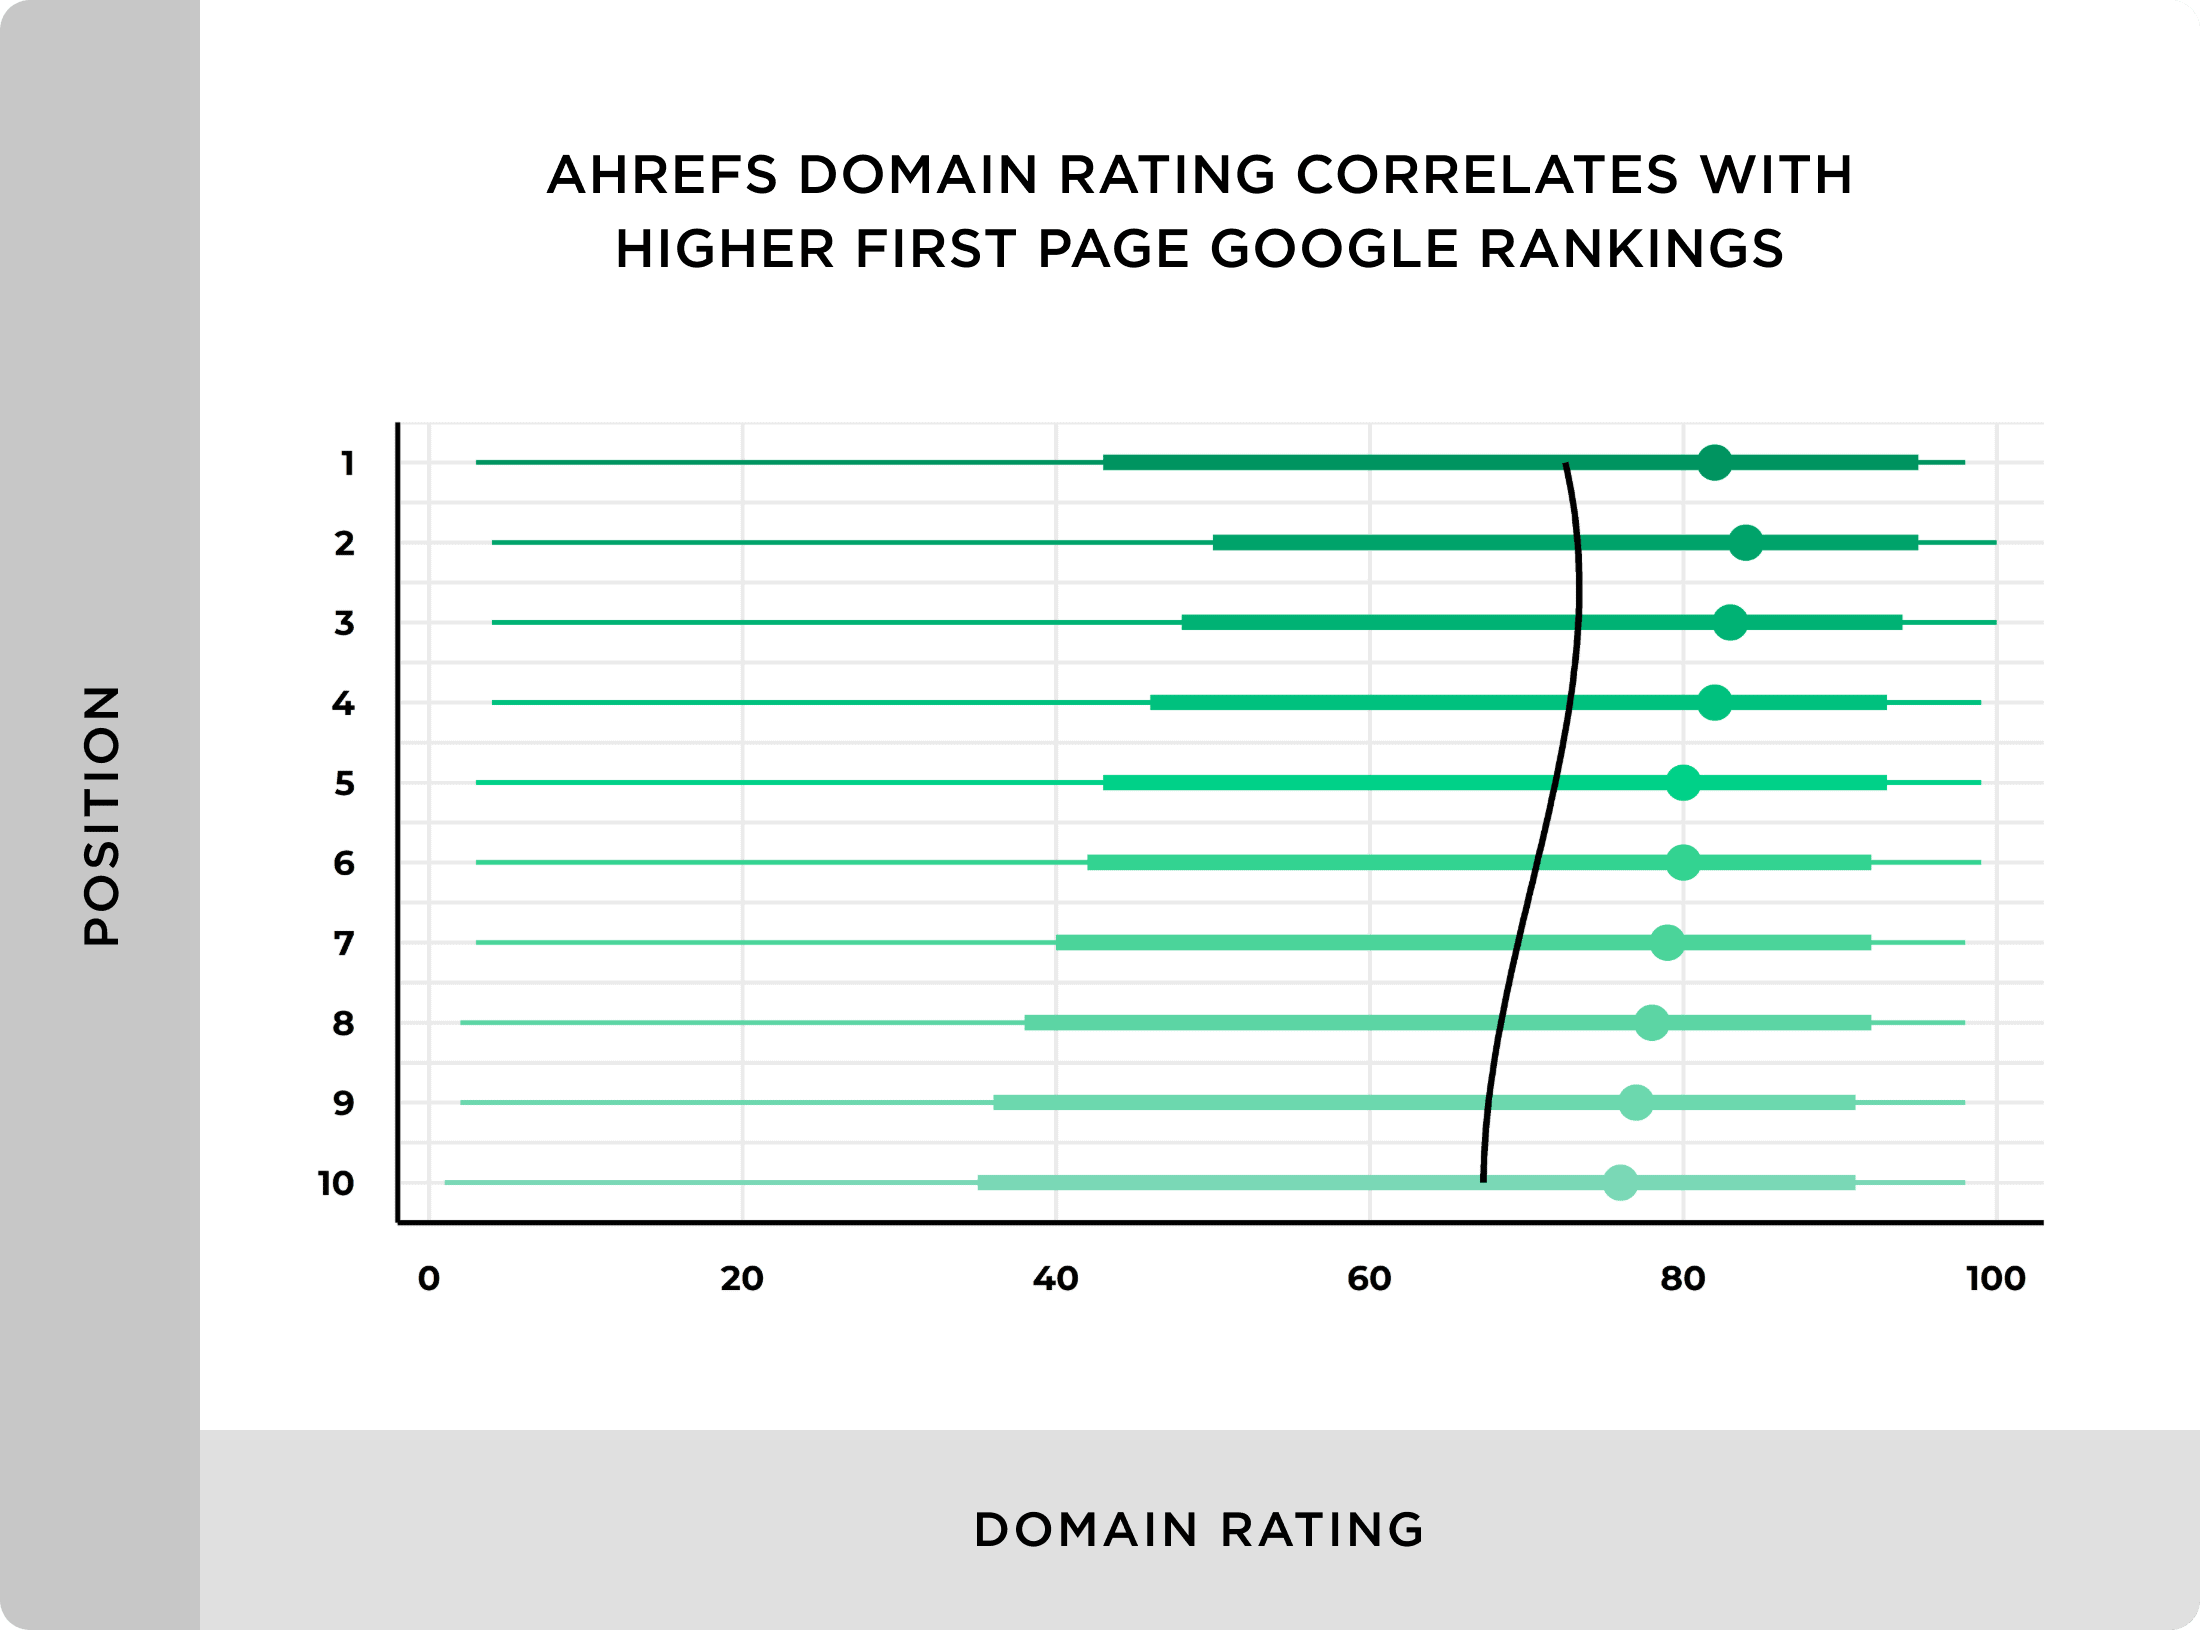 Ahrefs – Domain rating correlates with higher first page Google rankings